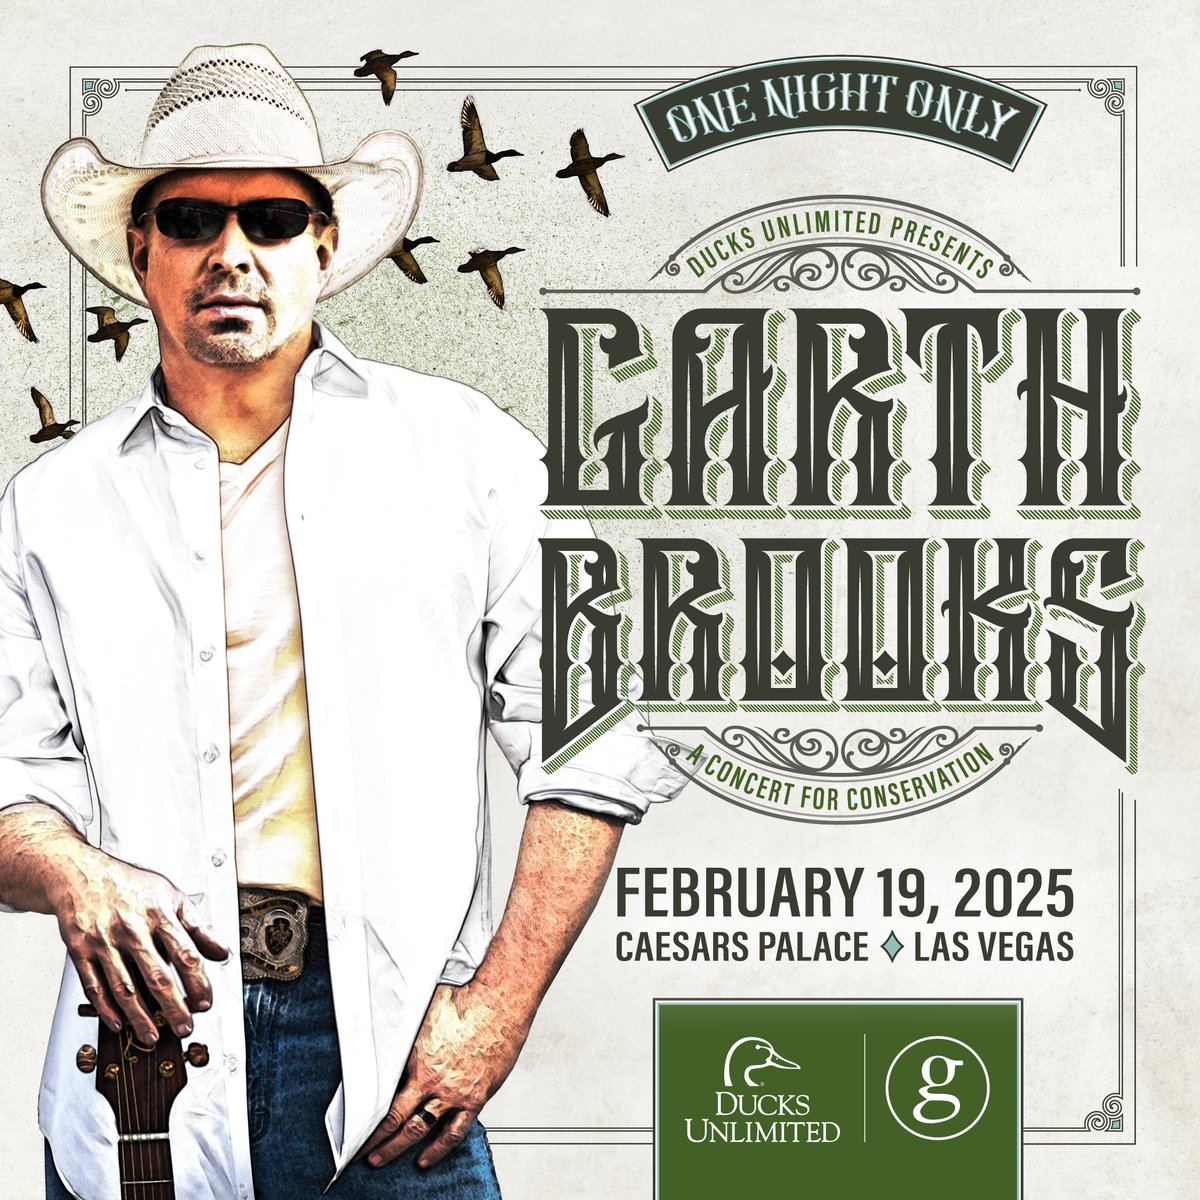 Enter to Experience Garth Brooks LIVE in Las Vegas: ducks.org/gbsweeps Enter our sweepstakes today and you and three friends could see Garth live in Vegas! 251 chances to win!